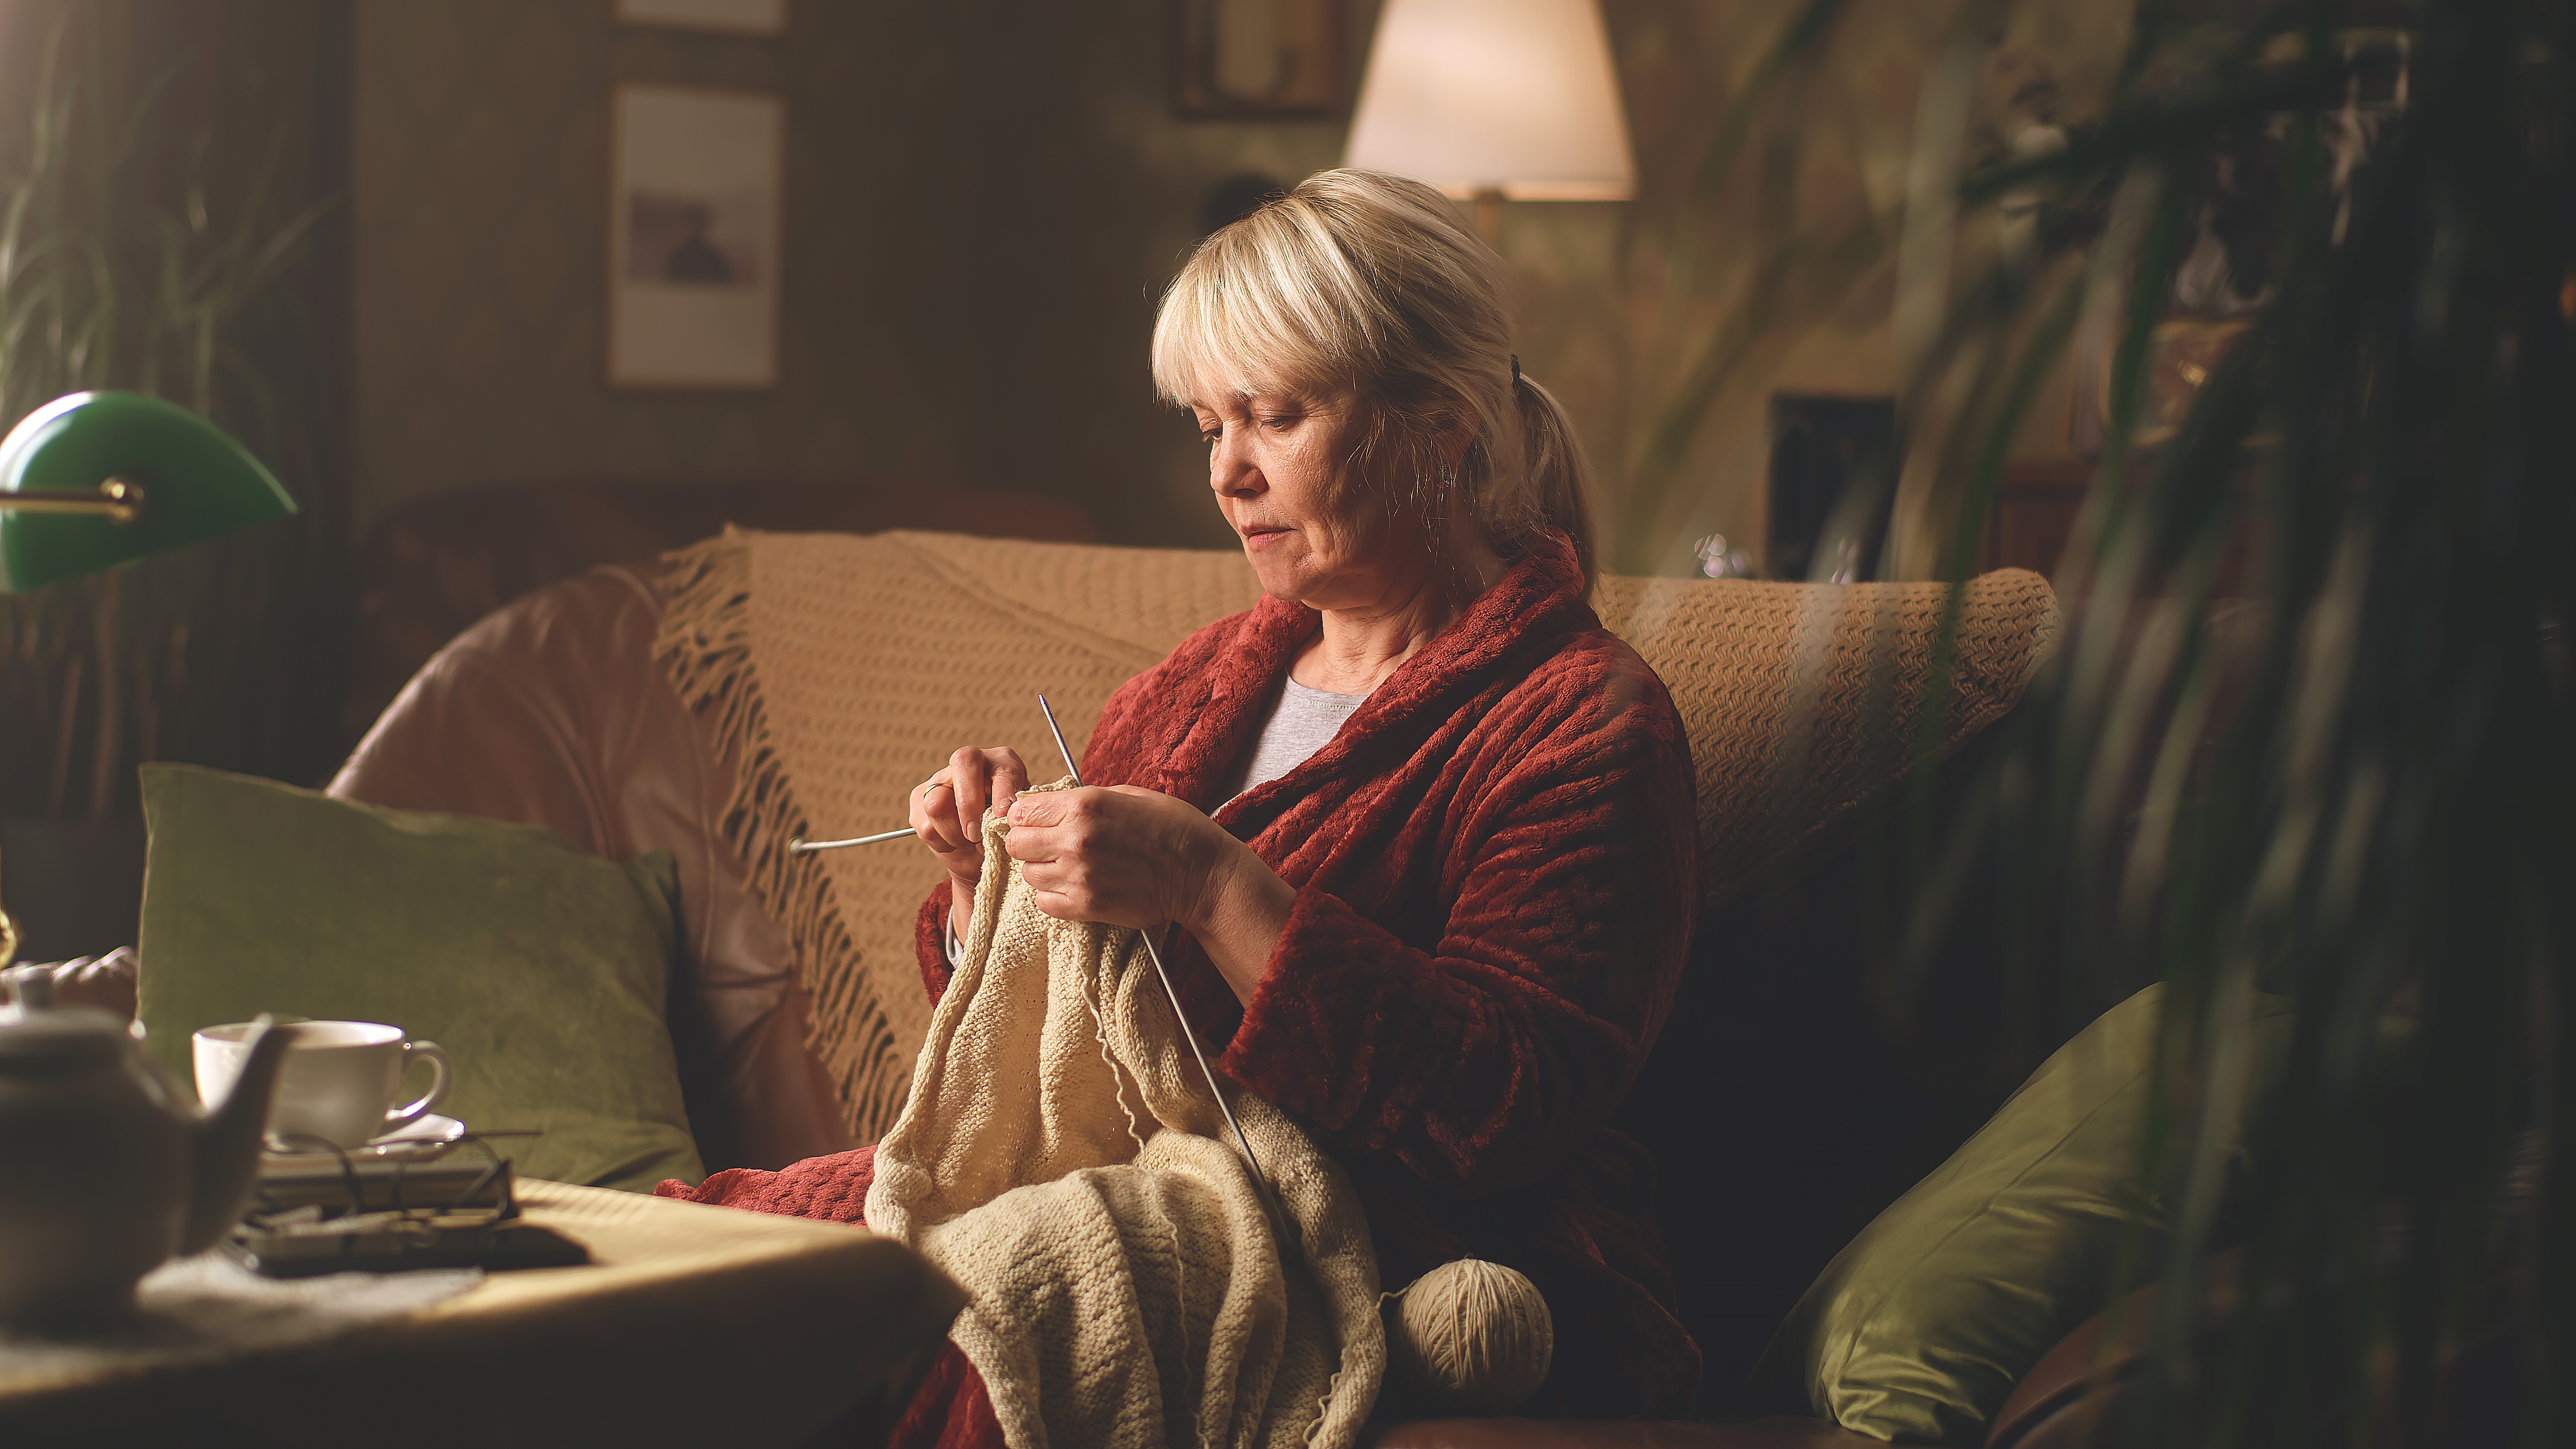 A senior woman knitting a sweater while sitting on the sofa | Source: Shutterstock